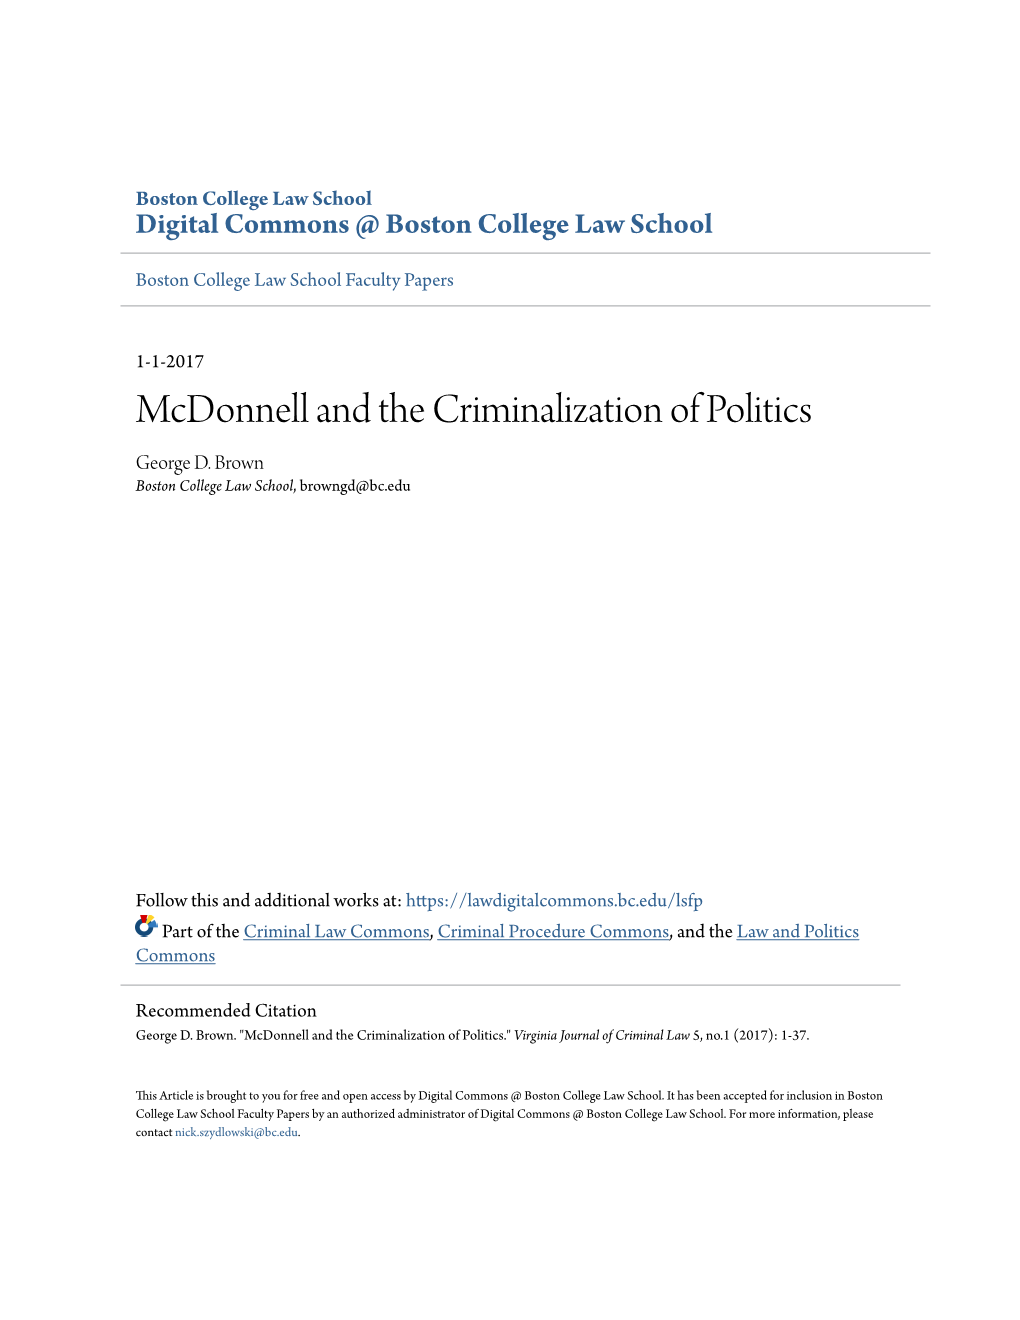 Mcdonnell and the Criminalization of Politics George D